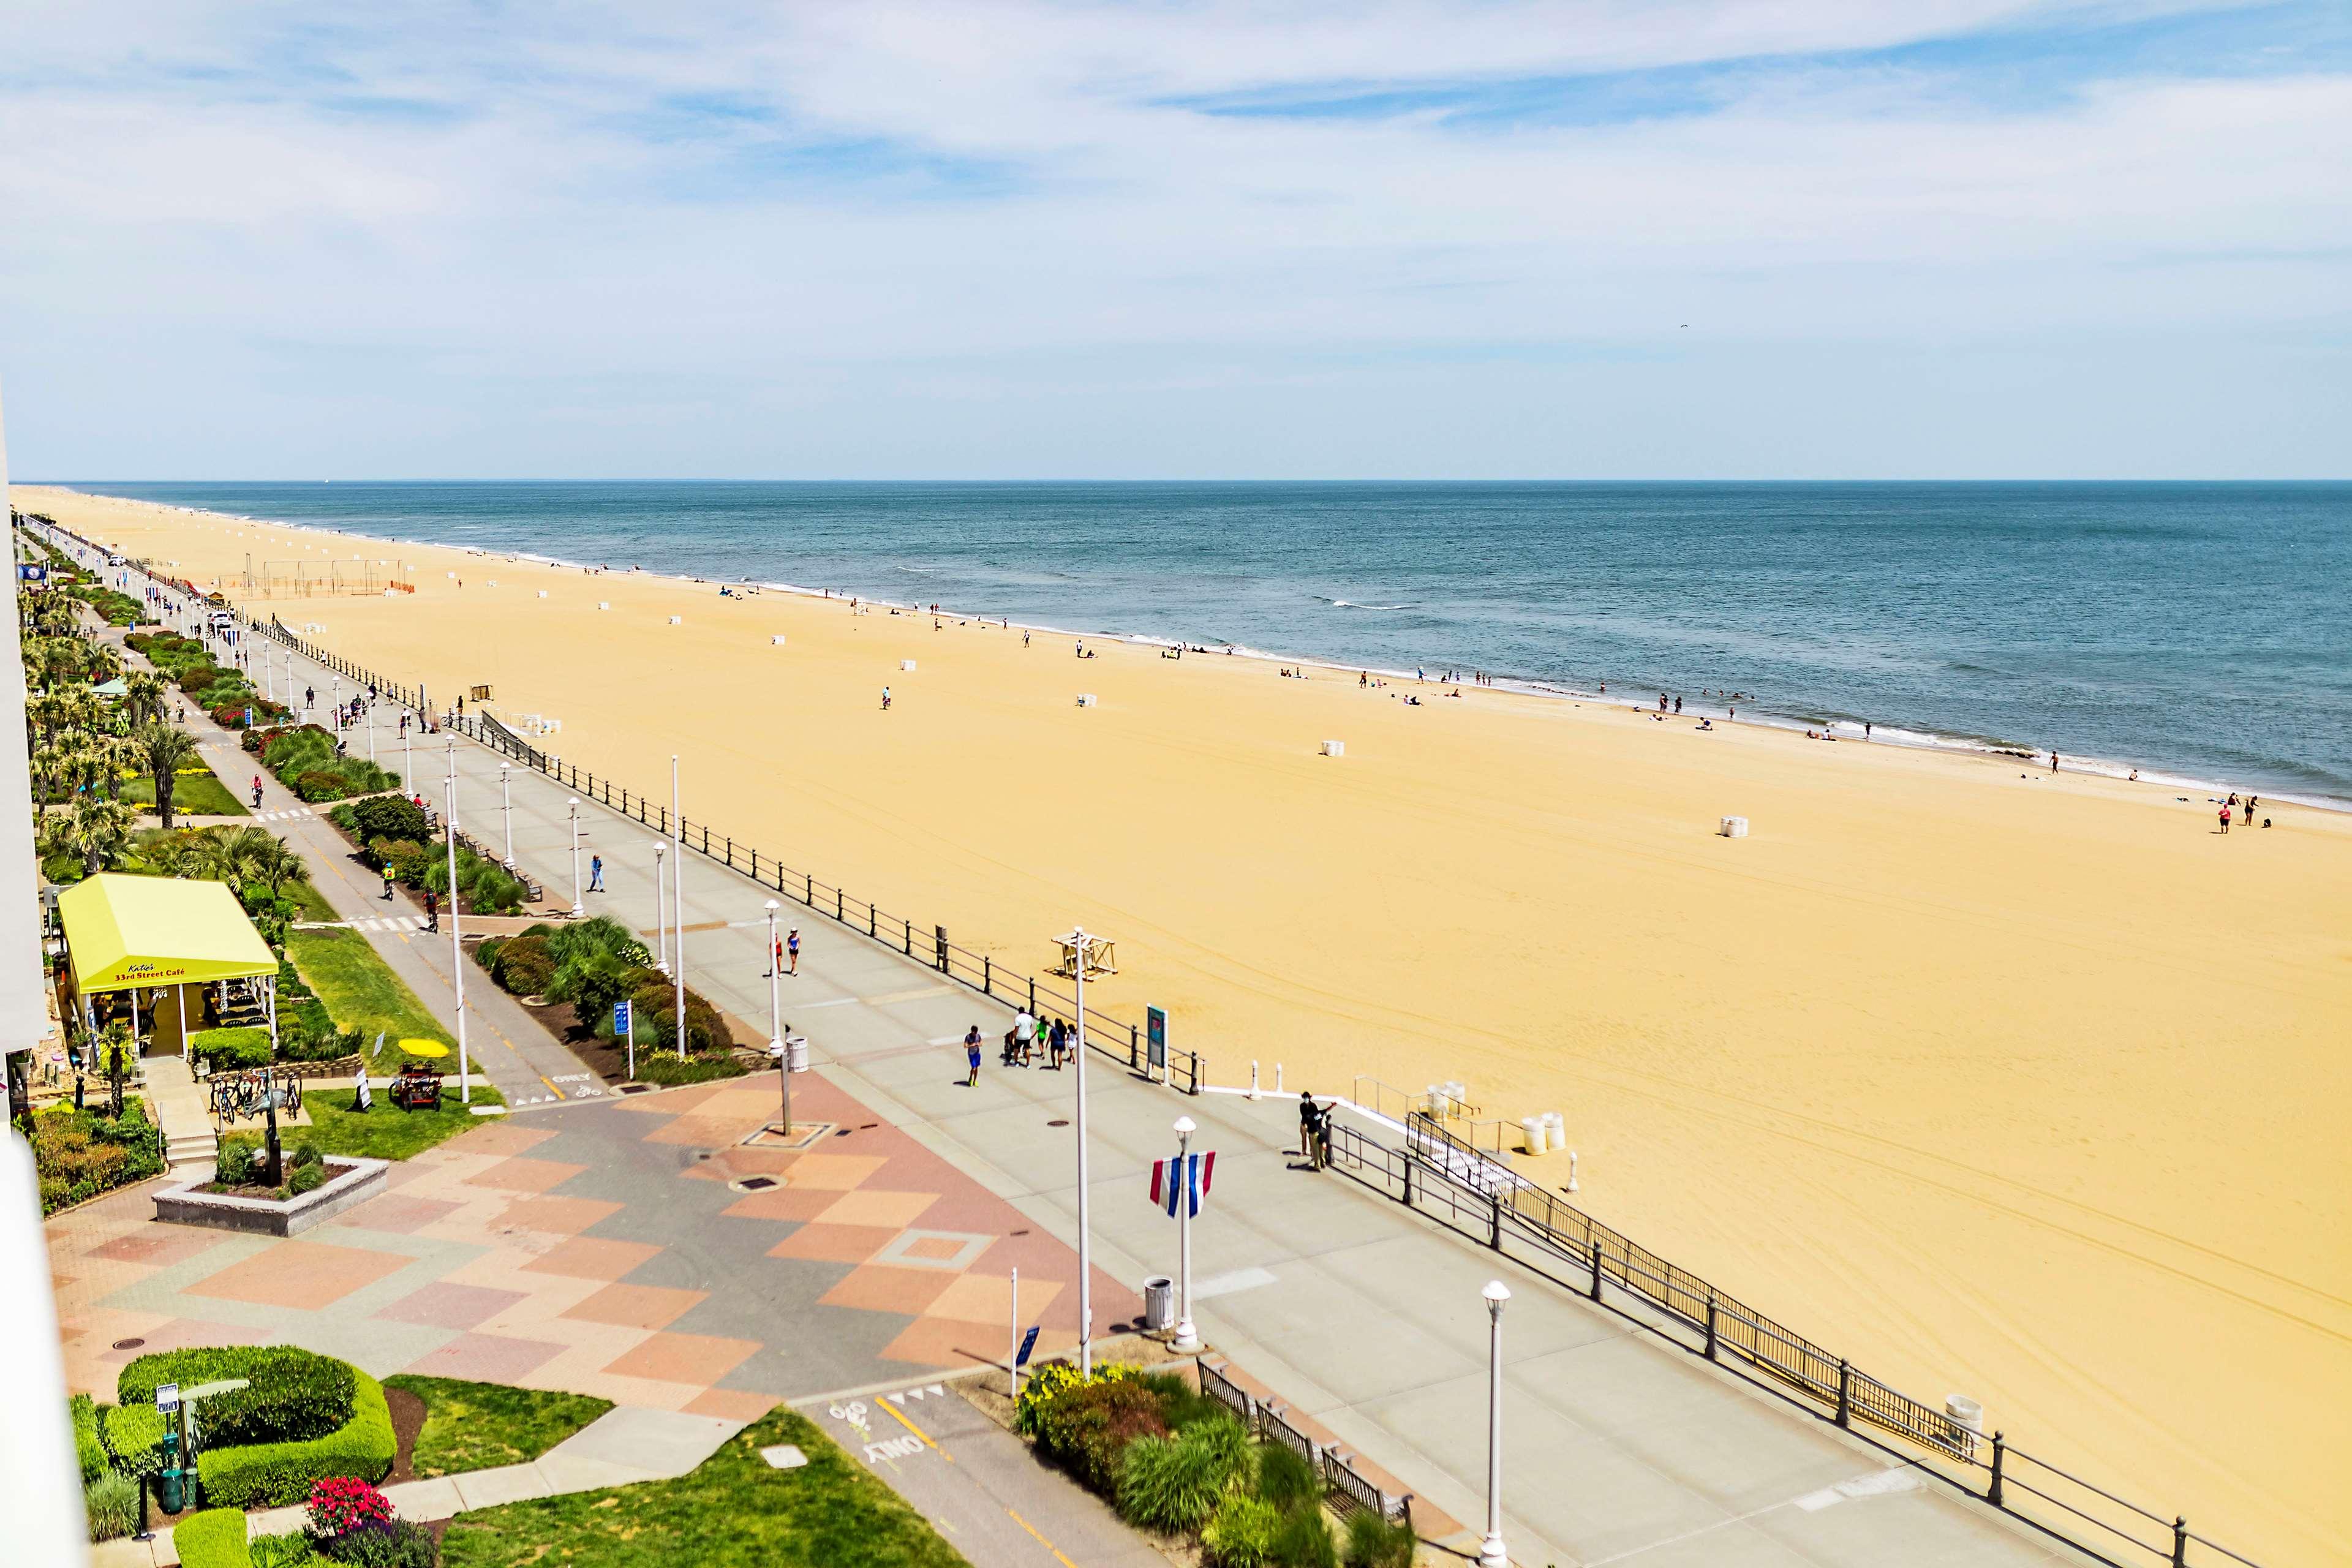 Photo of Virginia beach with very clean level of cleanliness